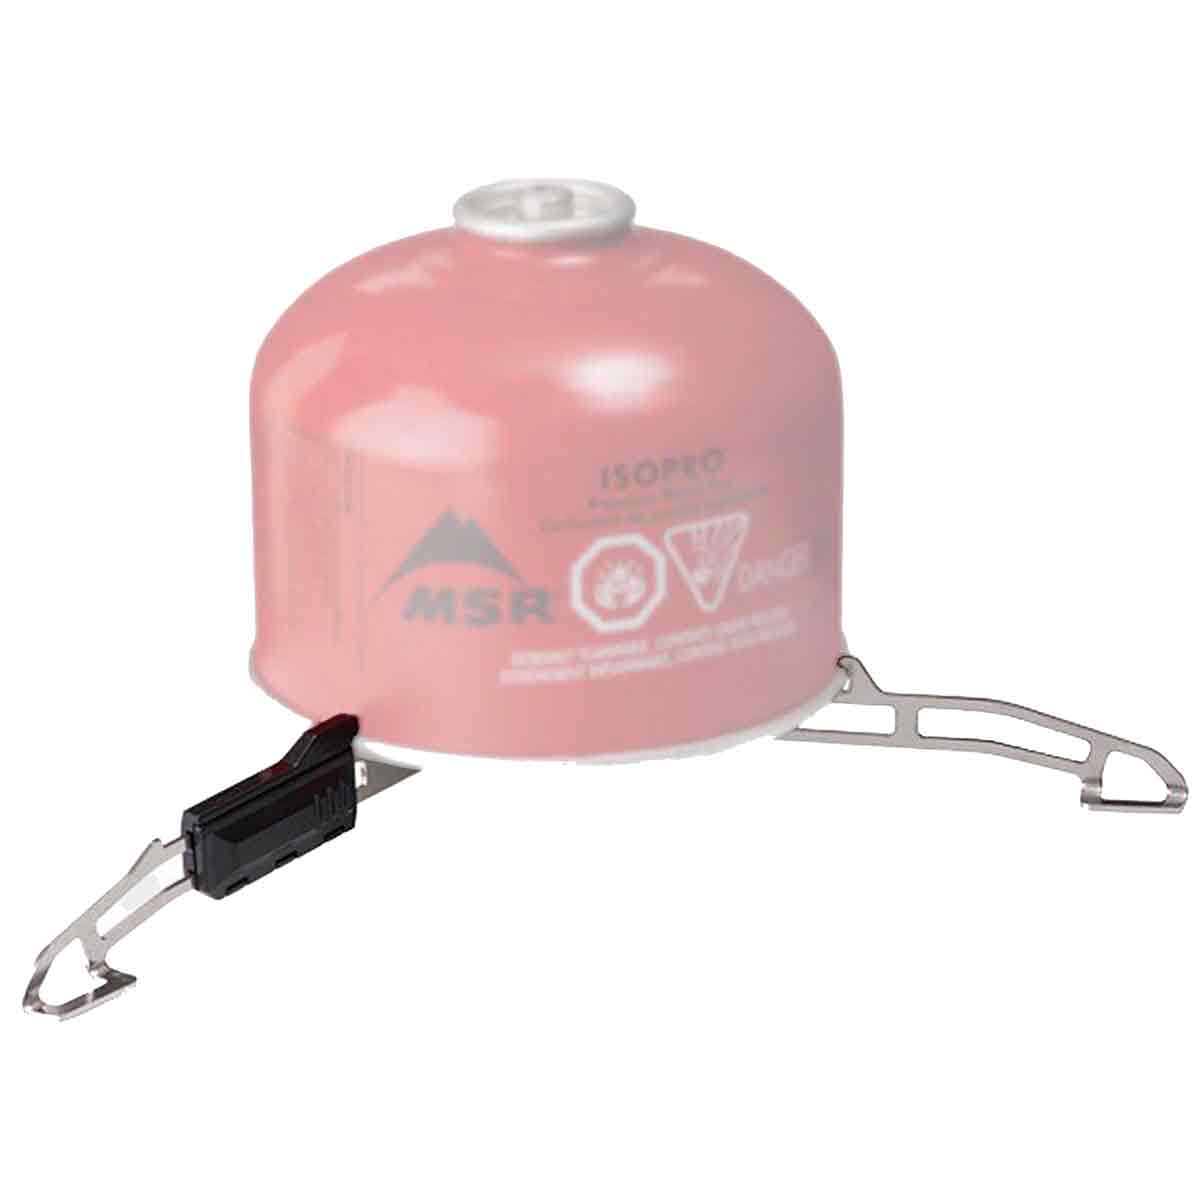 MSR Universal Gas Canister Stand - John Bull Clothing